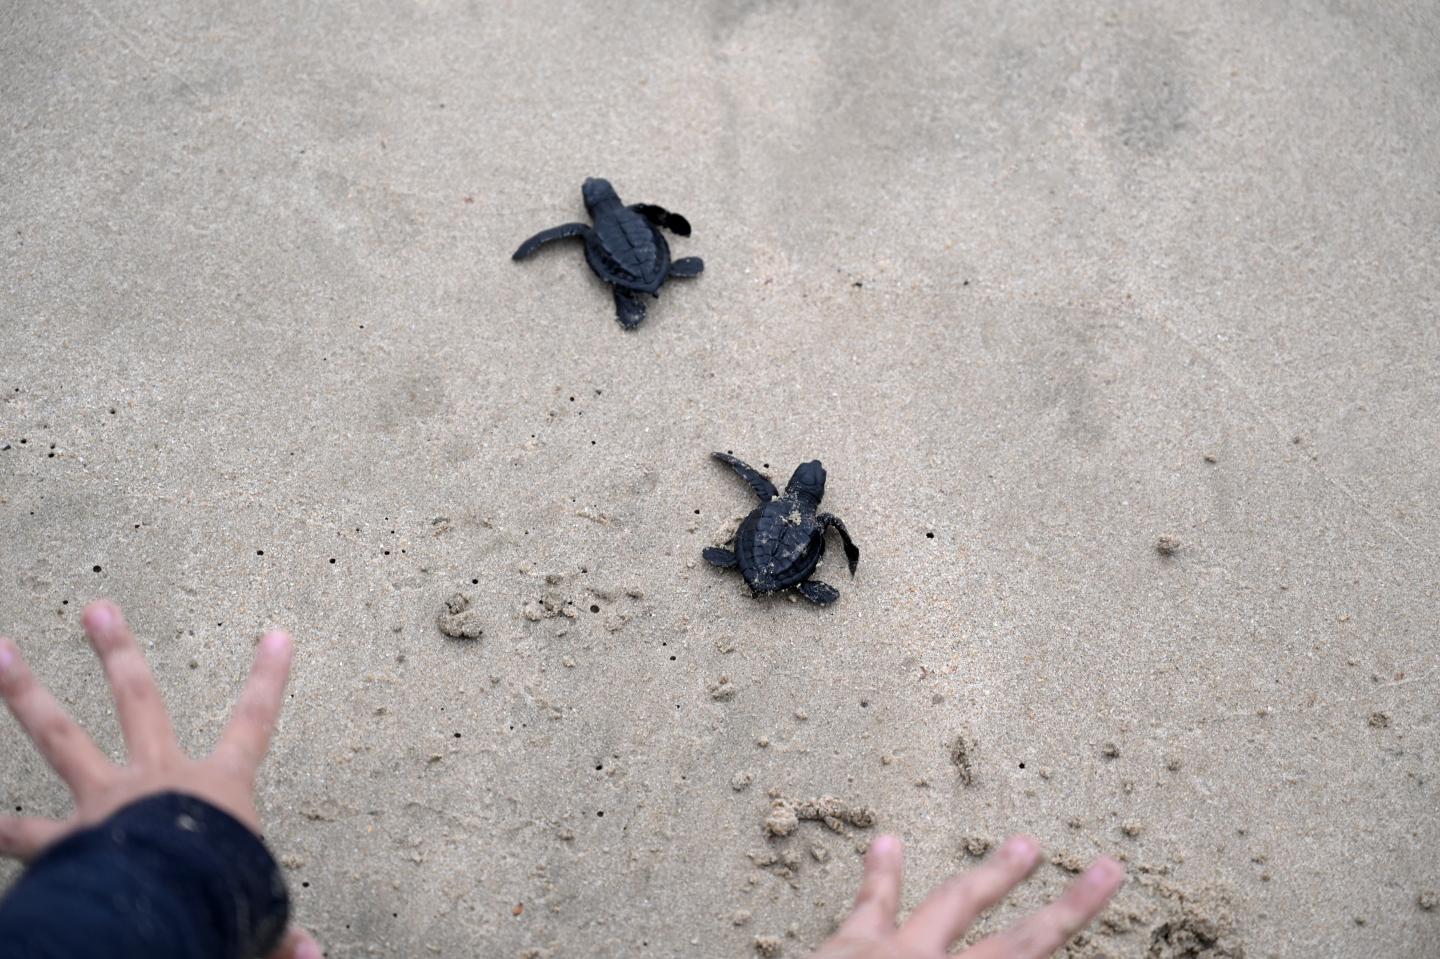 A pair of hands helping guide baby sea turtles on a beach